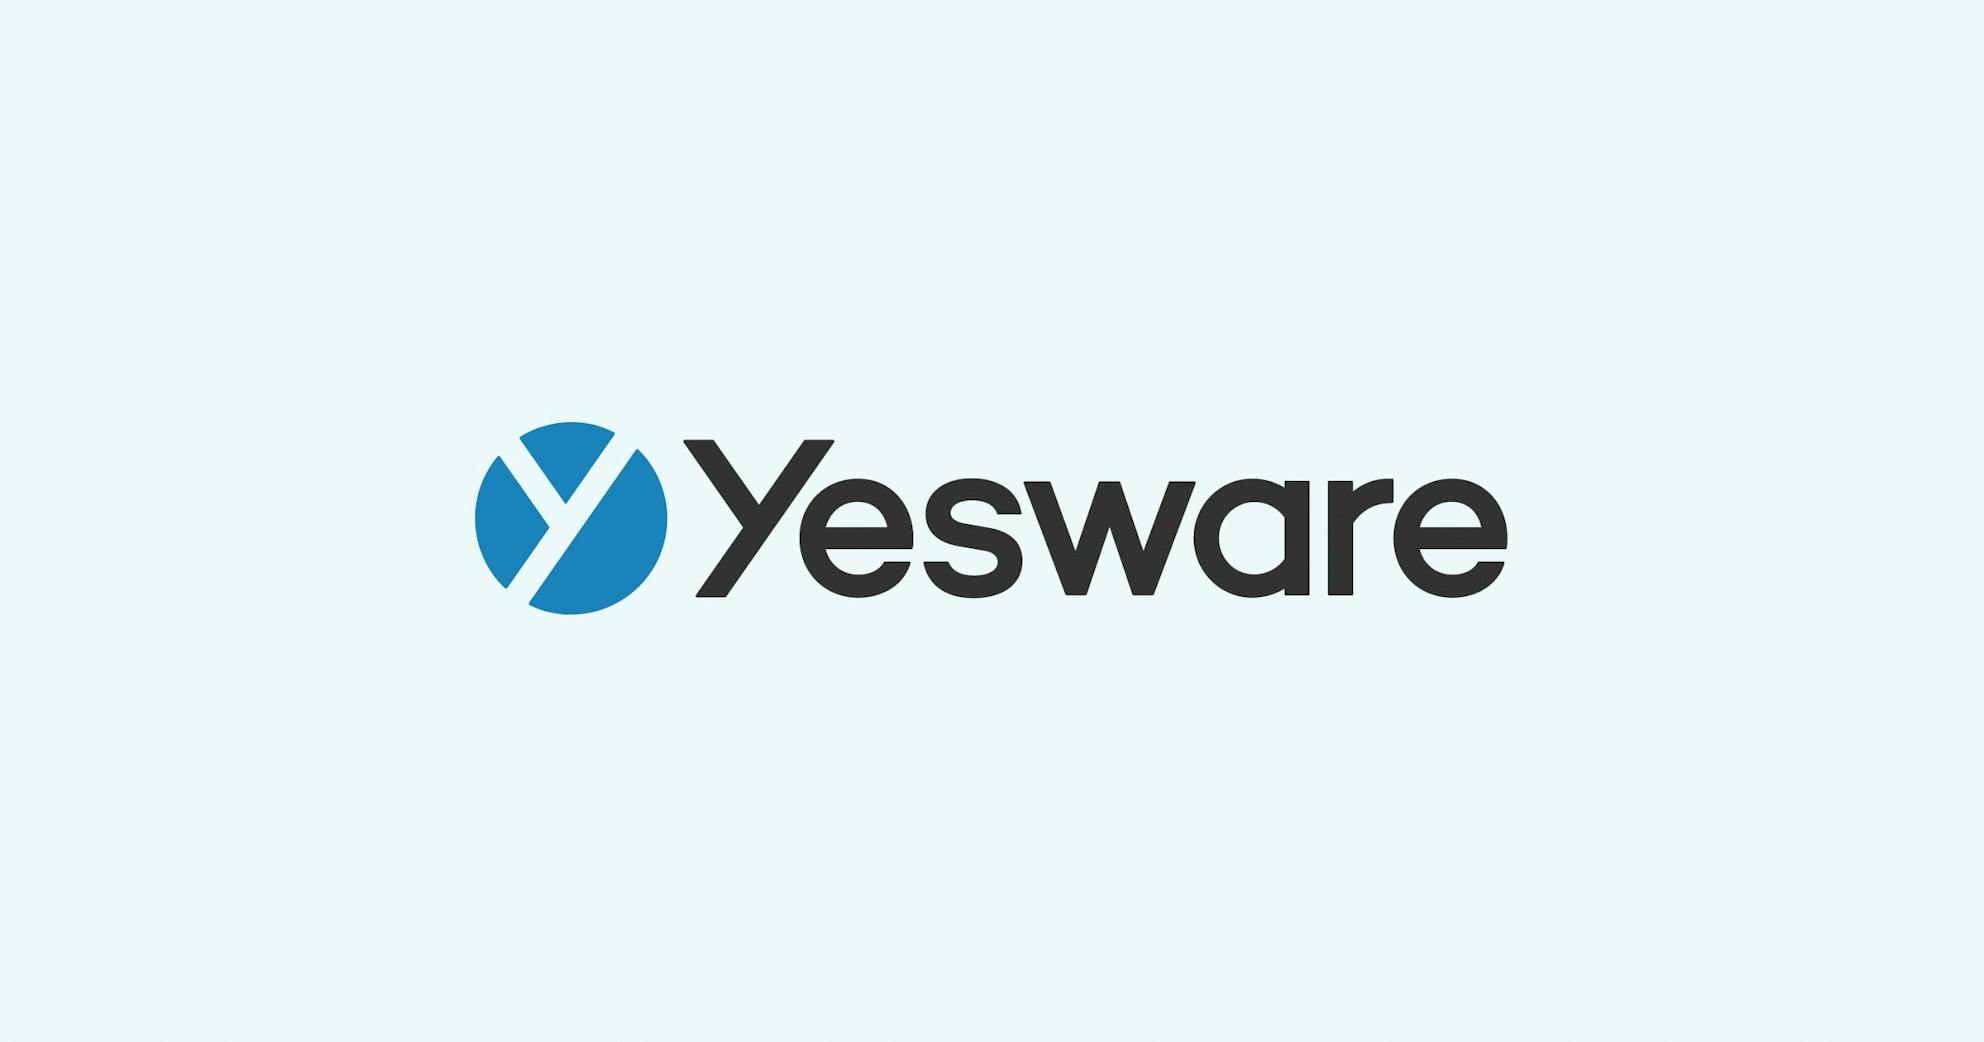 How to use Yesware to track sales activity in Marketo